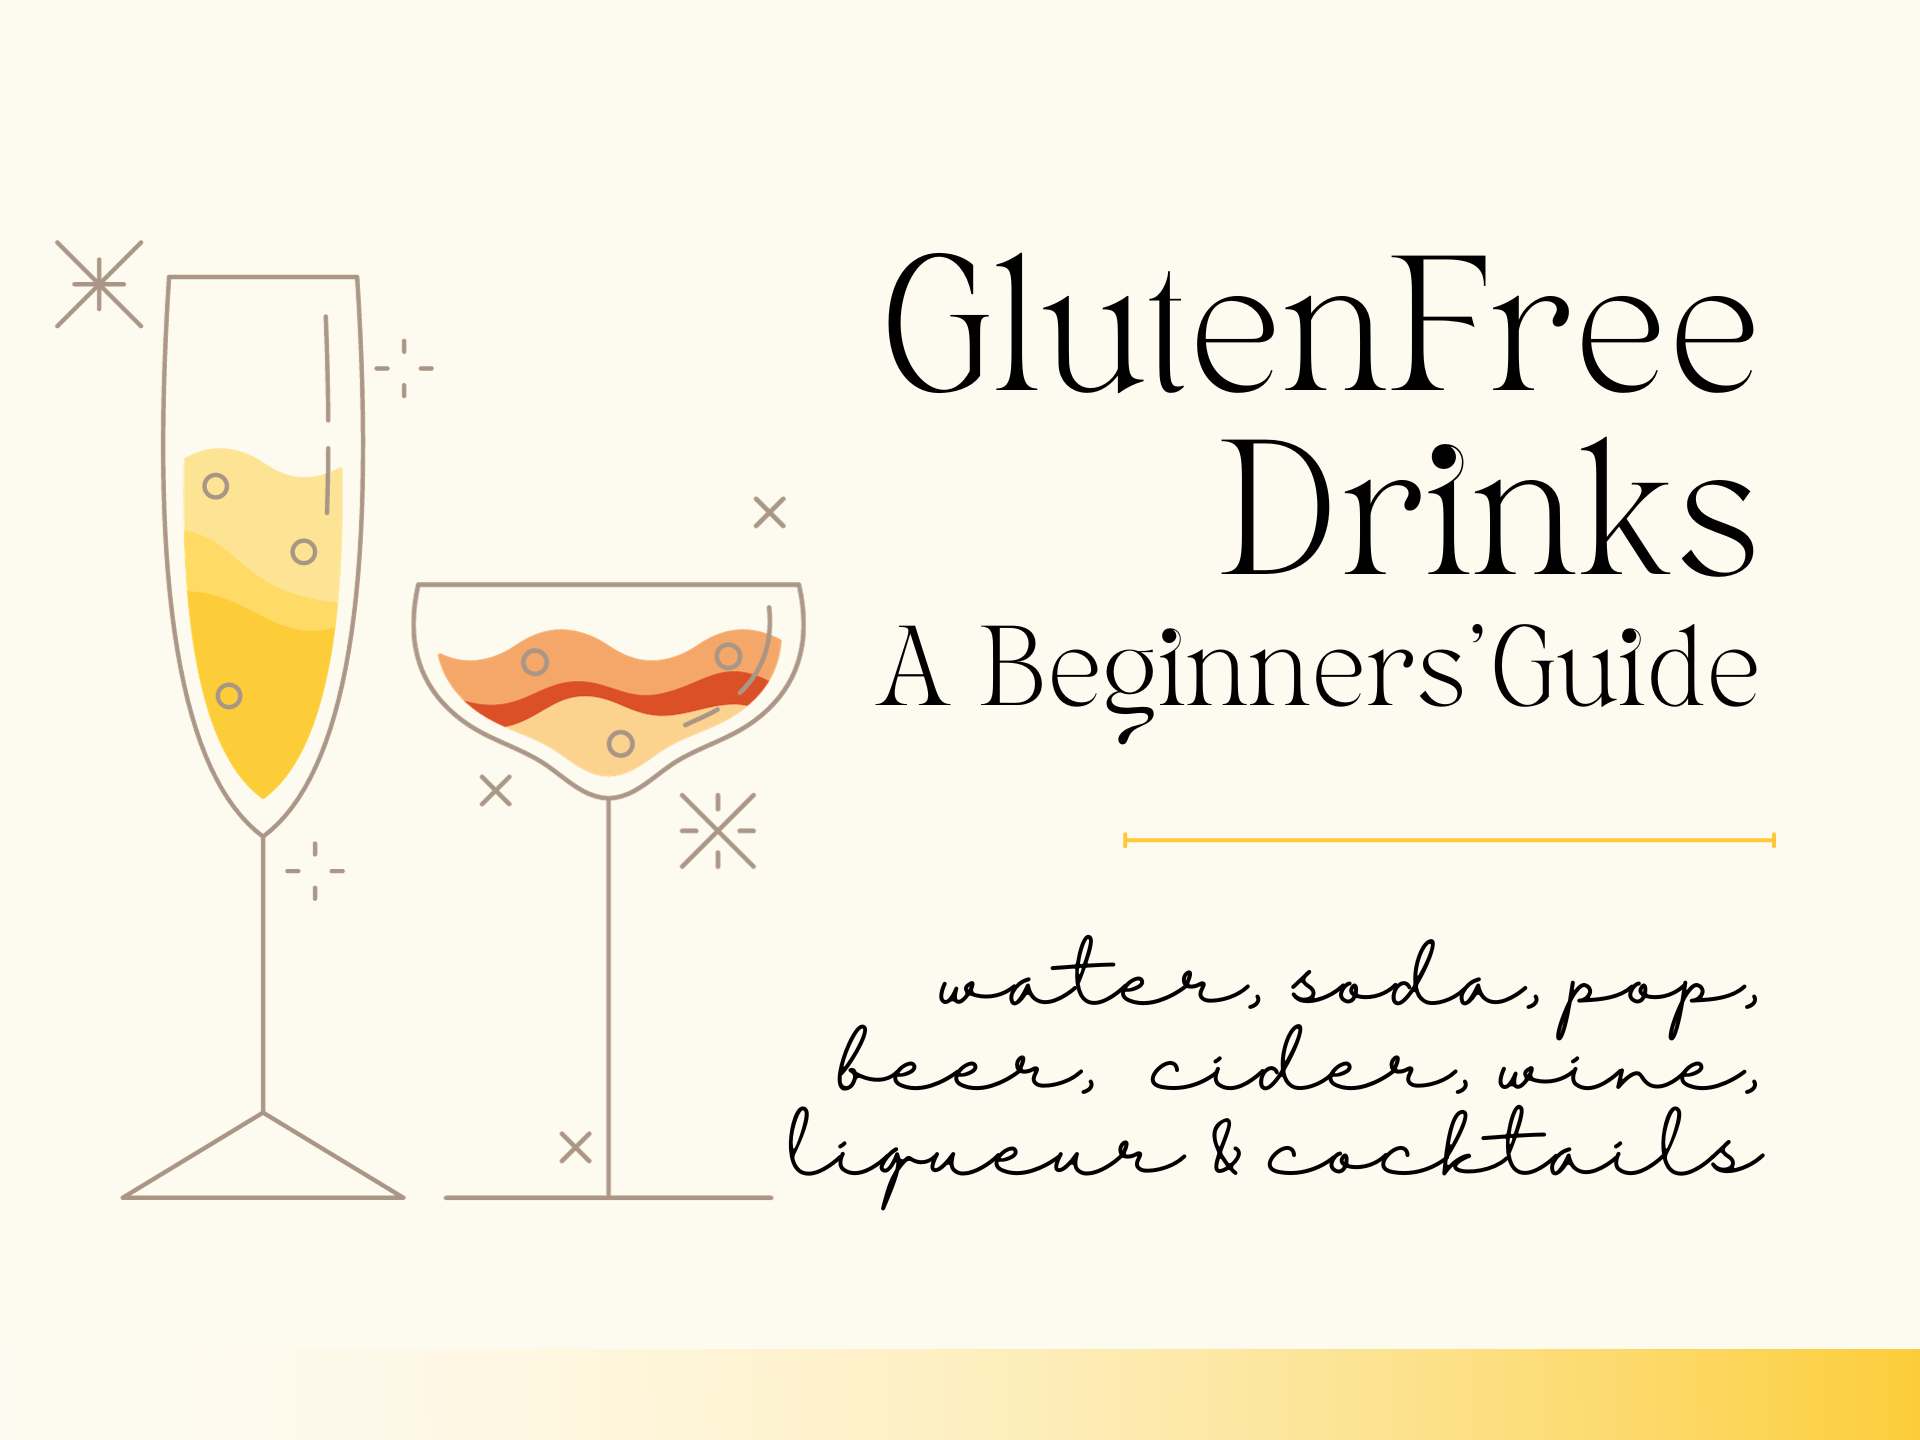 Beginners' Guide to Gluten-Free Drinks: Intro on What to drink on a Gluten-Free Diet (cover)